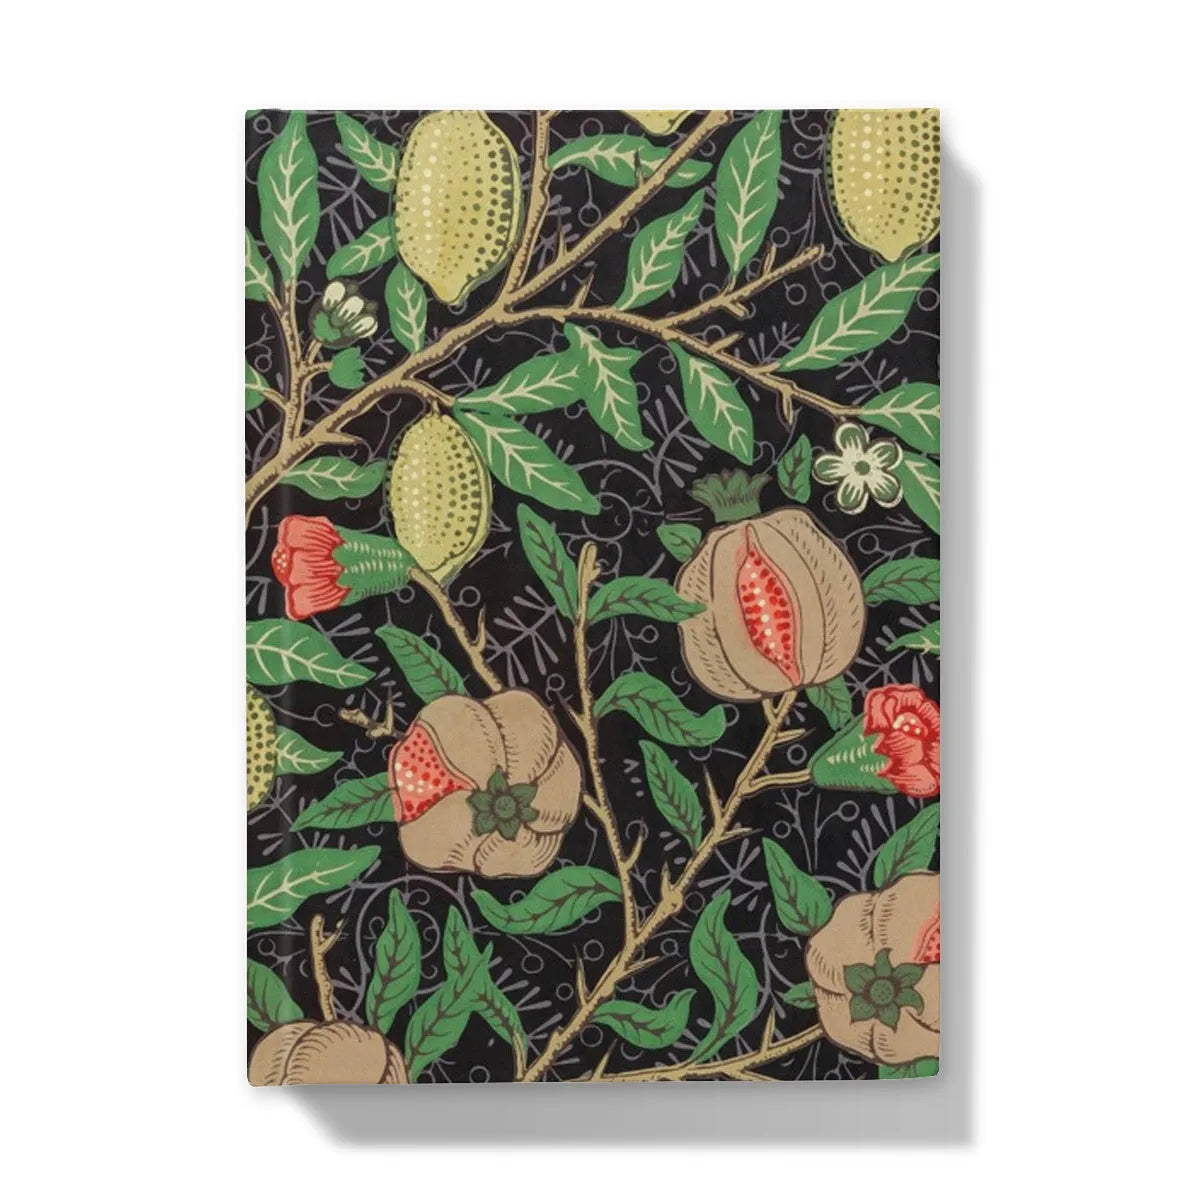 Four Fruits Too - William Morris Hardback Journal - 5’x7’ / 5’ x 7’ - Lined Paper - Notebooks & Notepads - Aesthetic Art